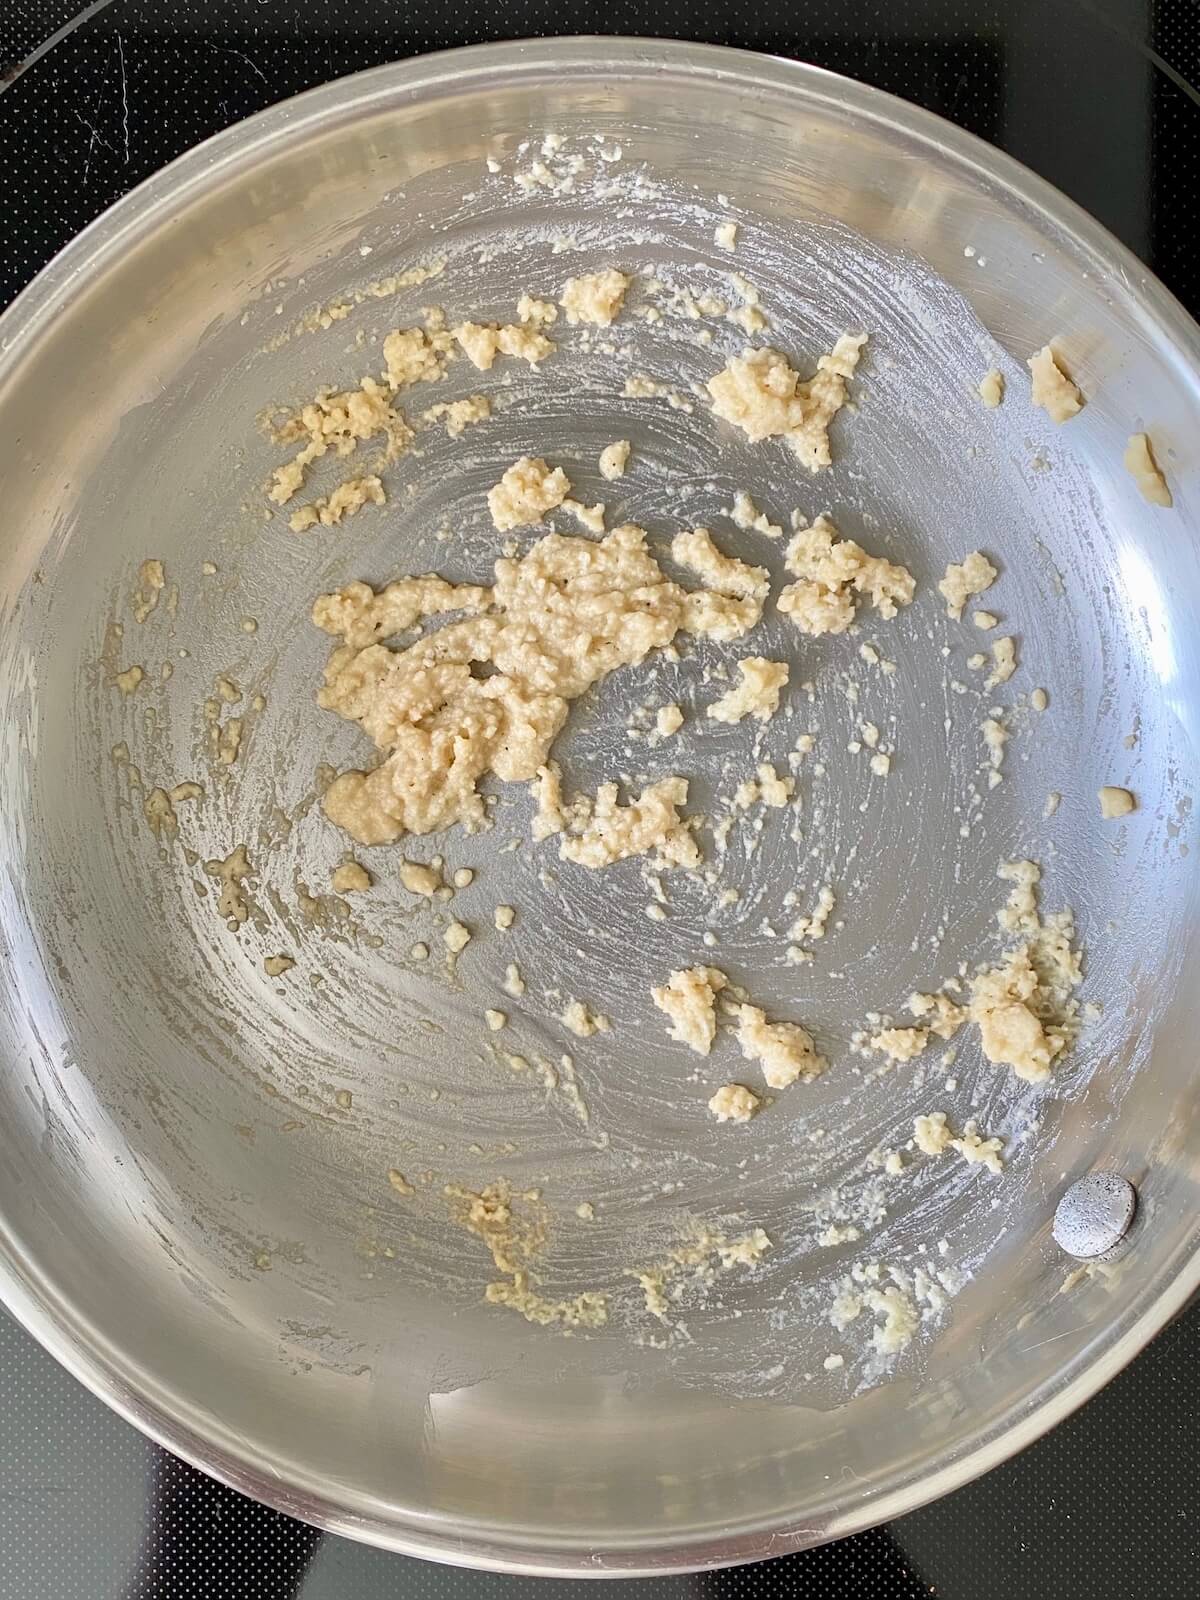 A basic roux of butter and flour in a stainless steel pan.